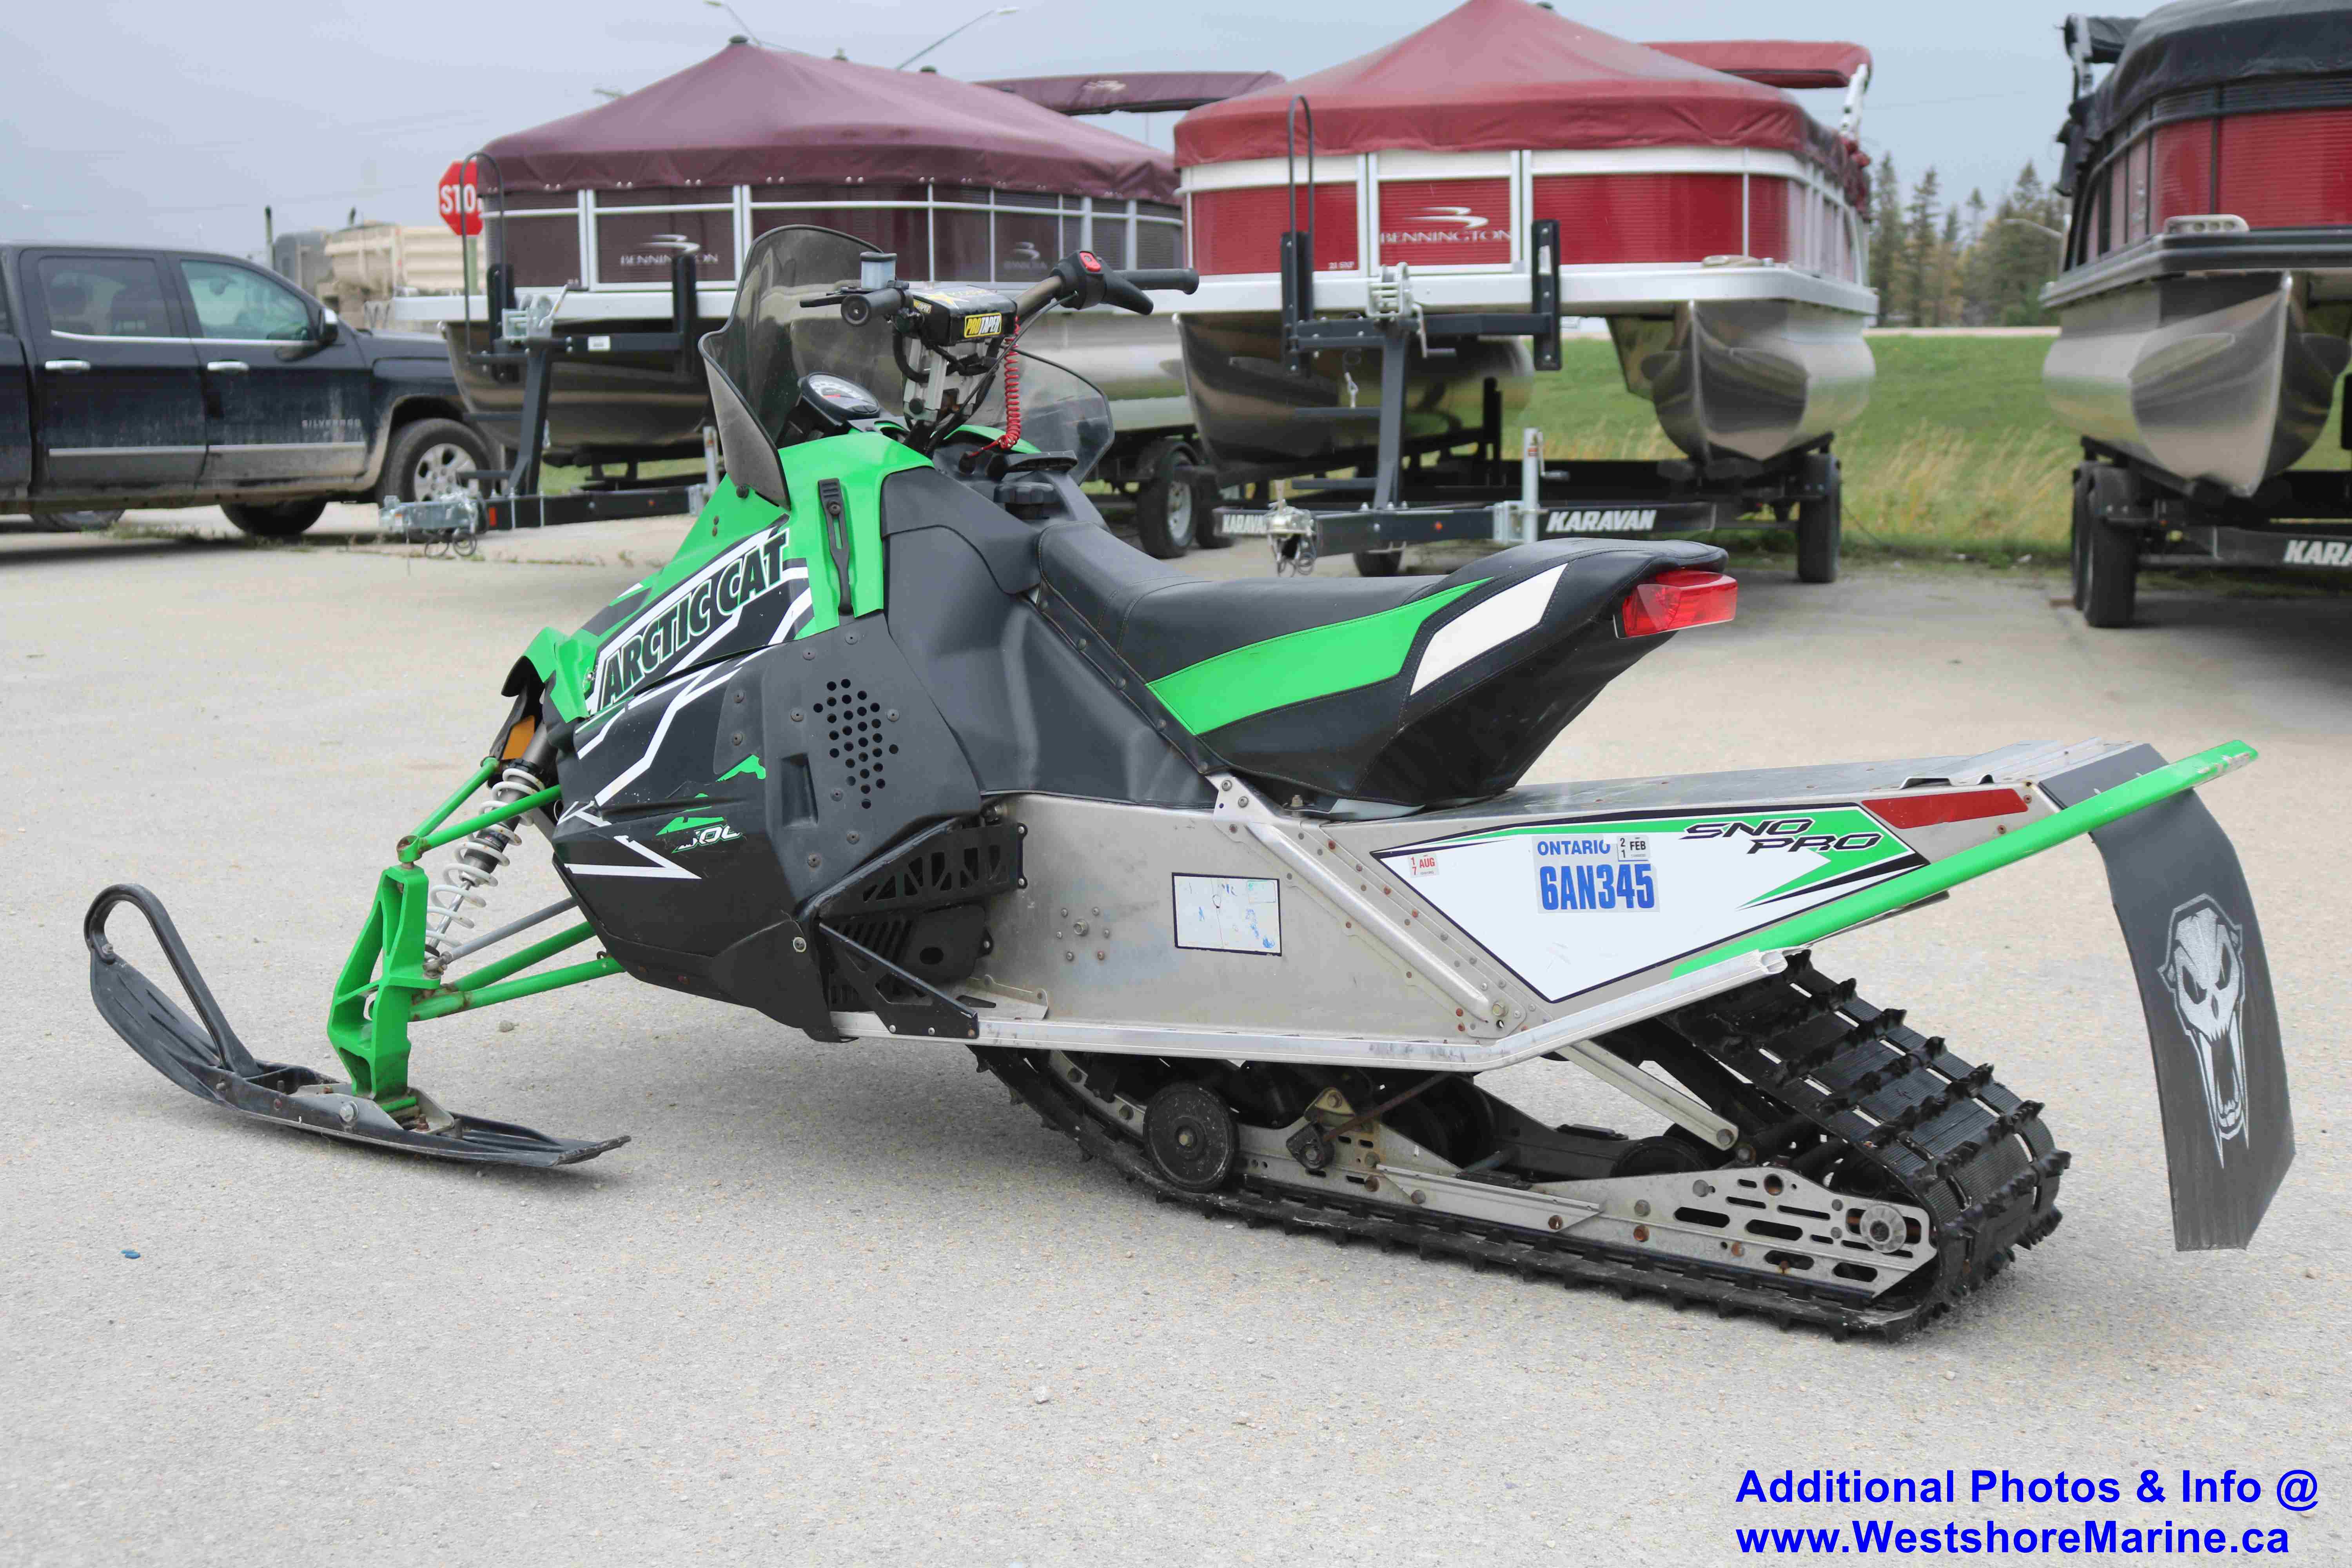 PreOwned 2012 ARCTIC CAT 500 SNOW PRO SNOWMOBILE in 101443